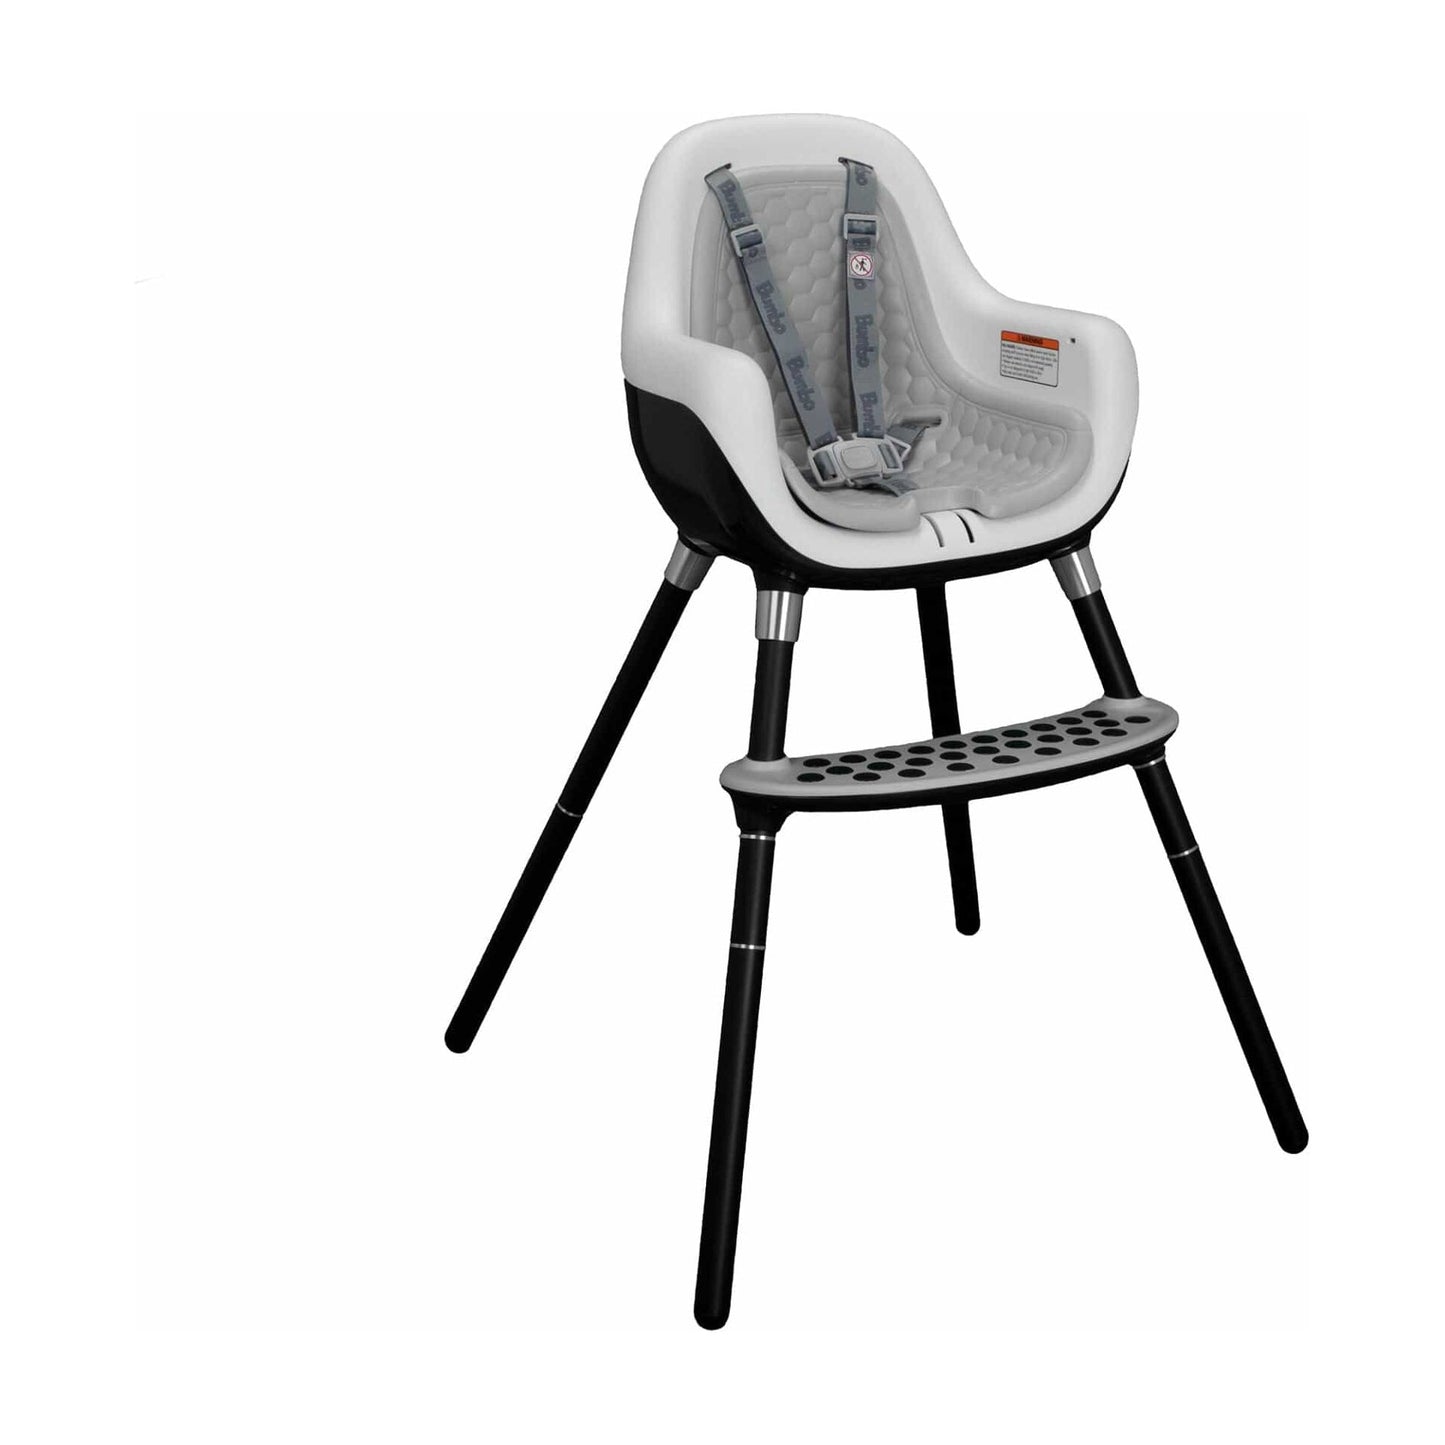 Bumbo Highchair - Cool Grey - The Online Toy Shop2